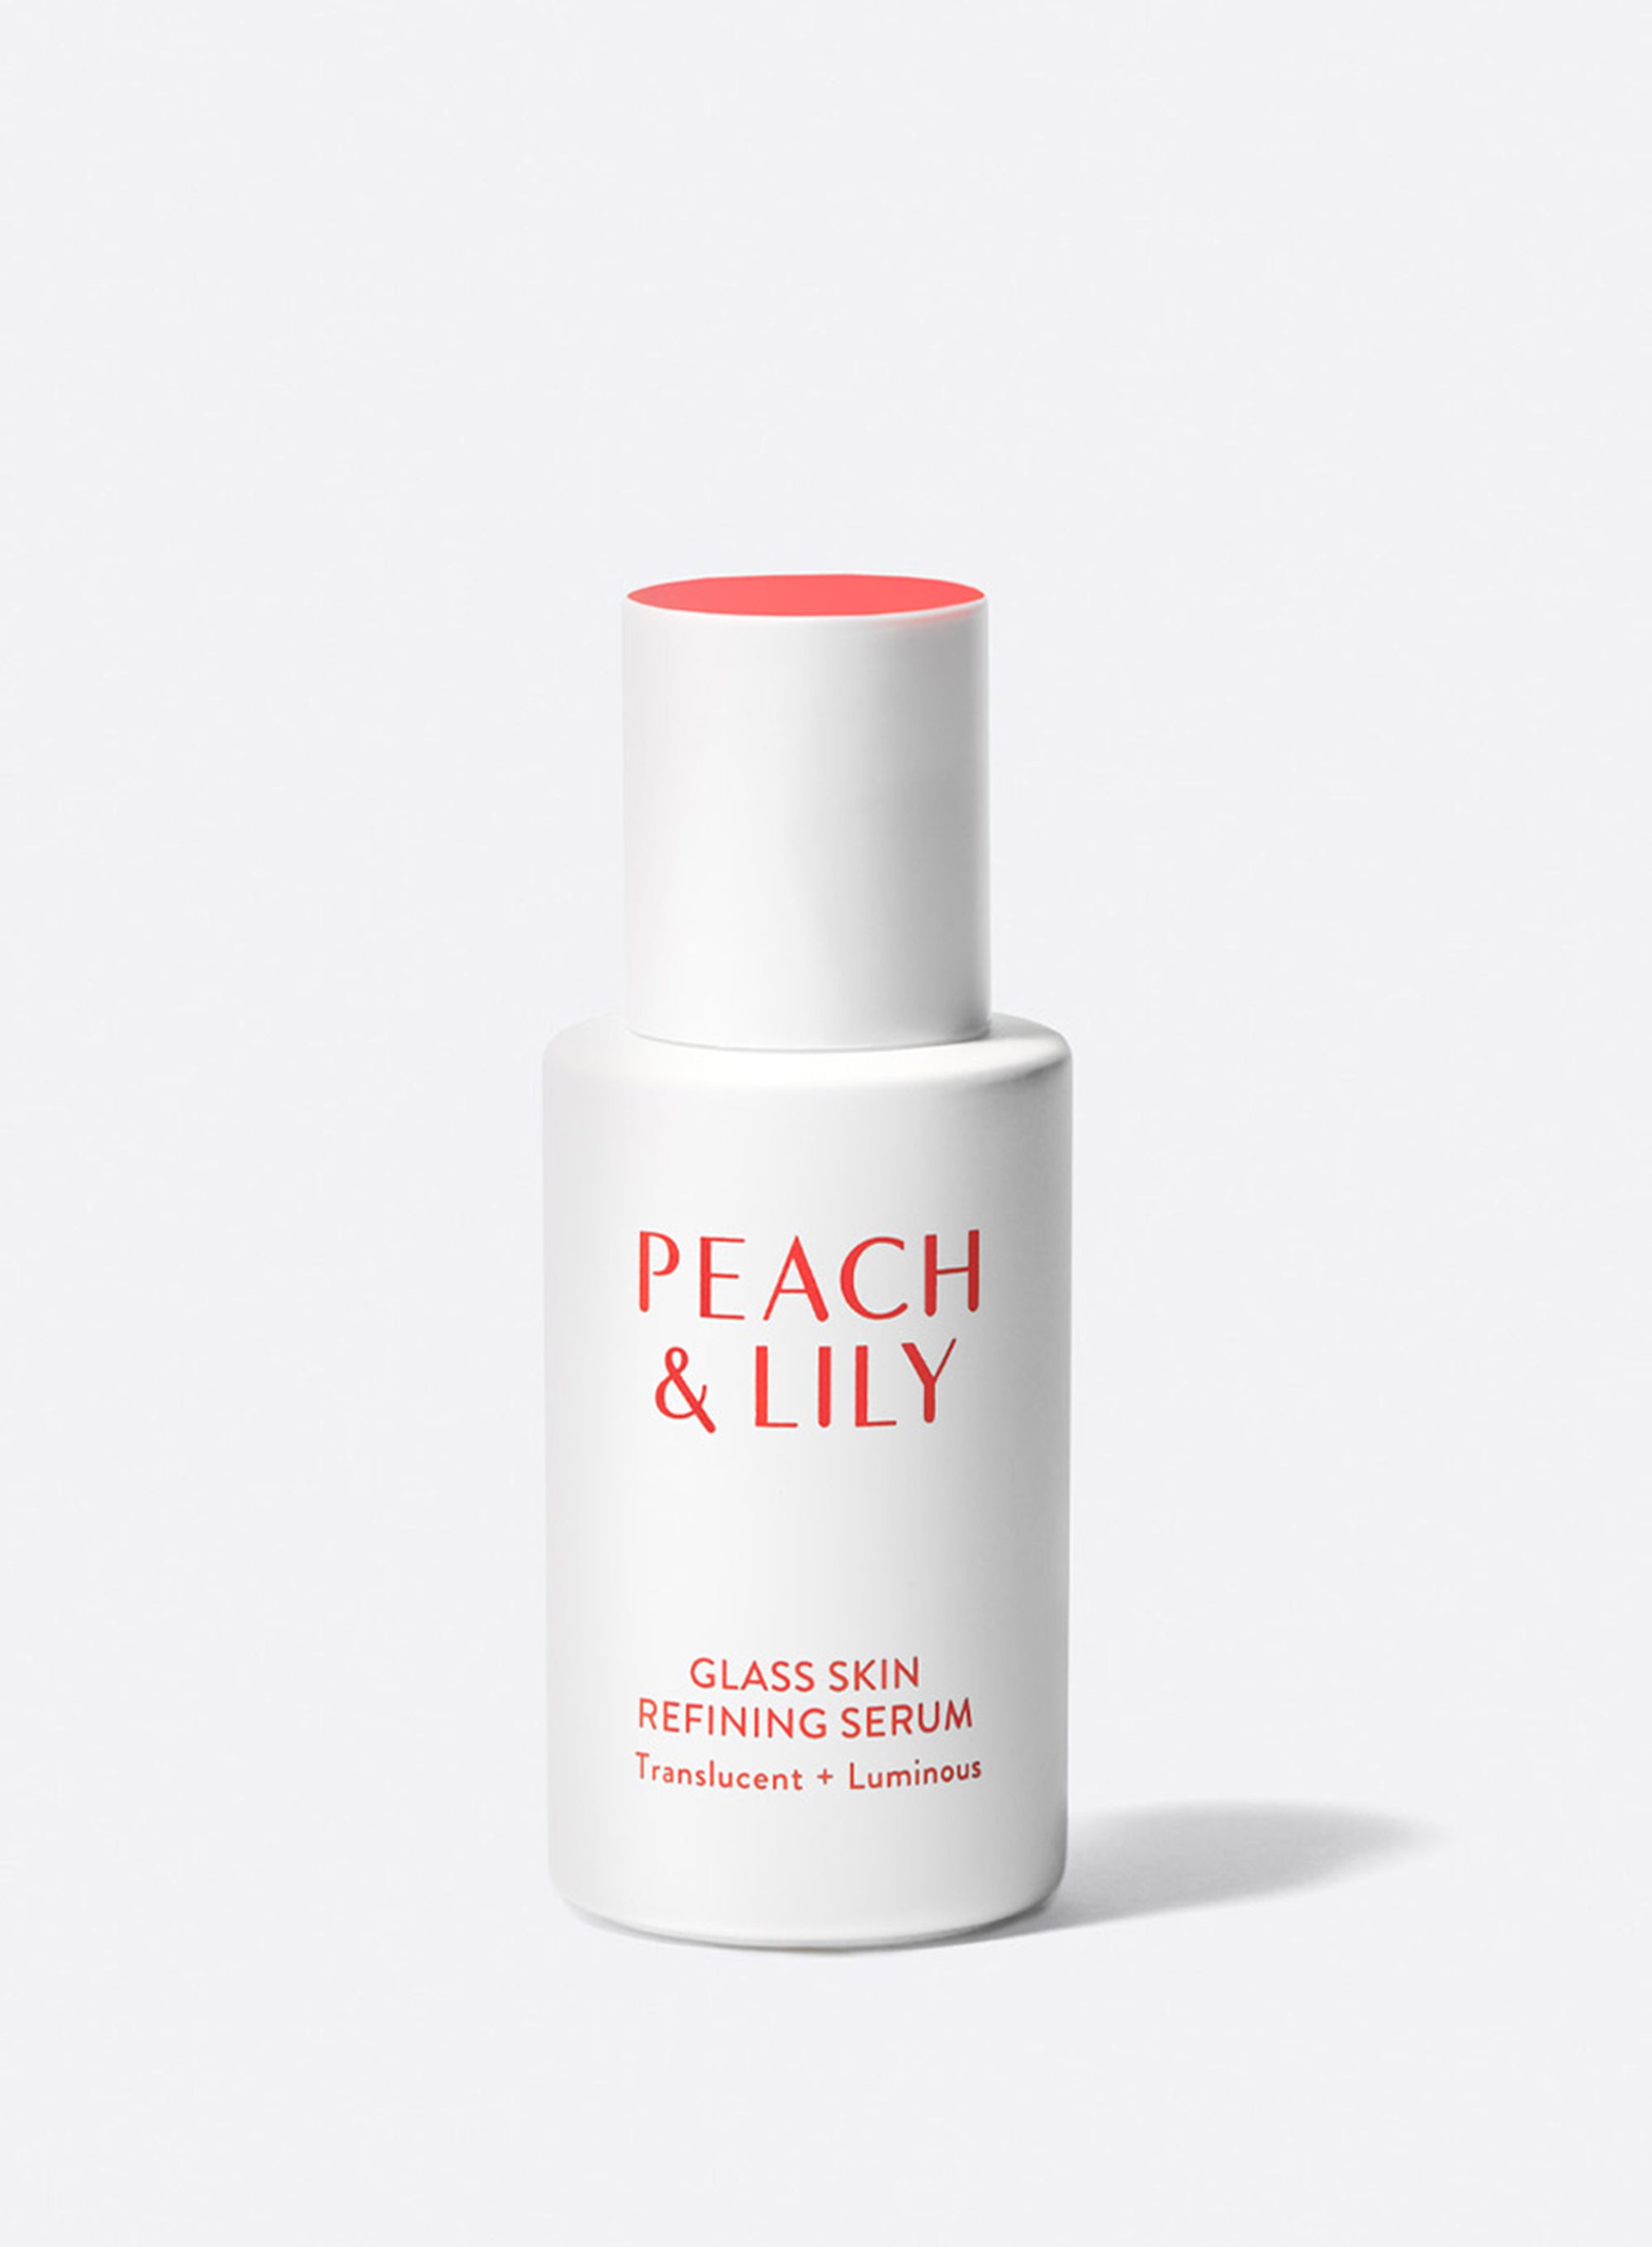 Peach & Lily Glass Skin Refining Serum Now Comes in Jumbo Size